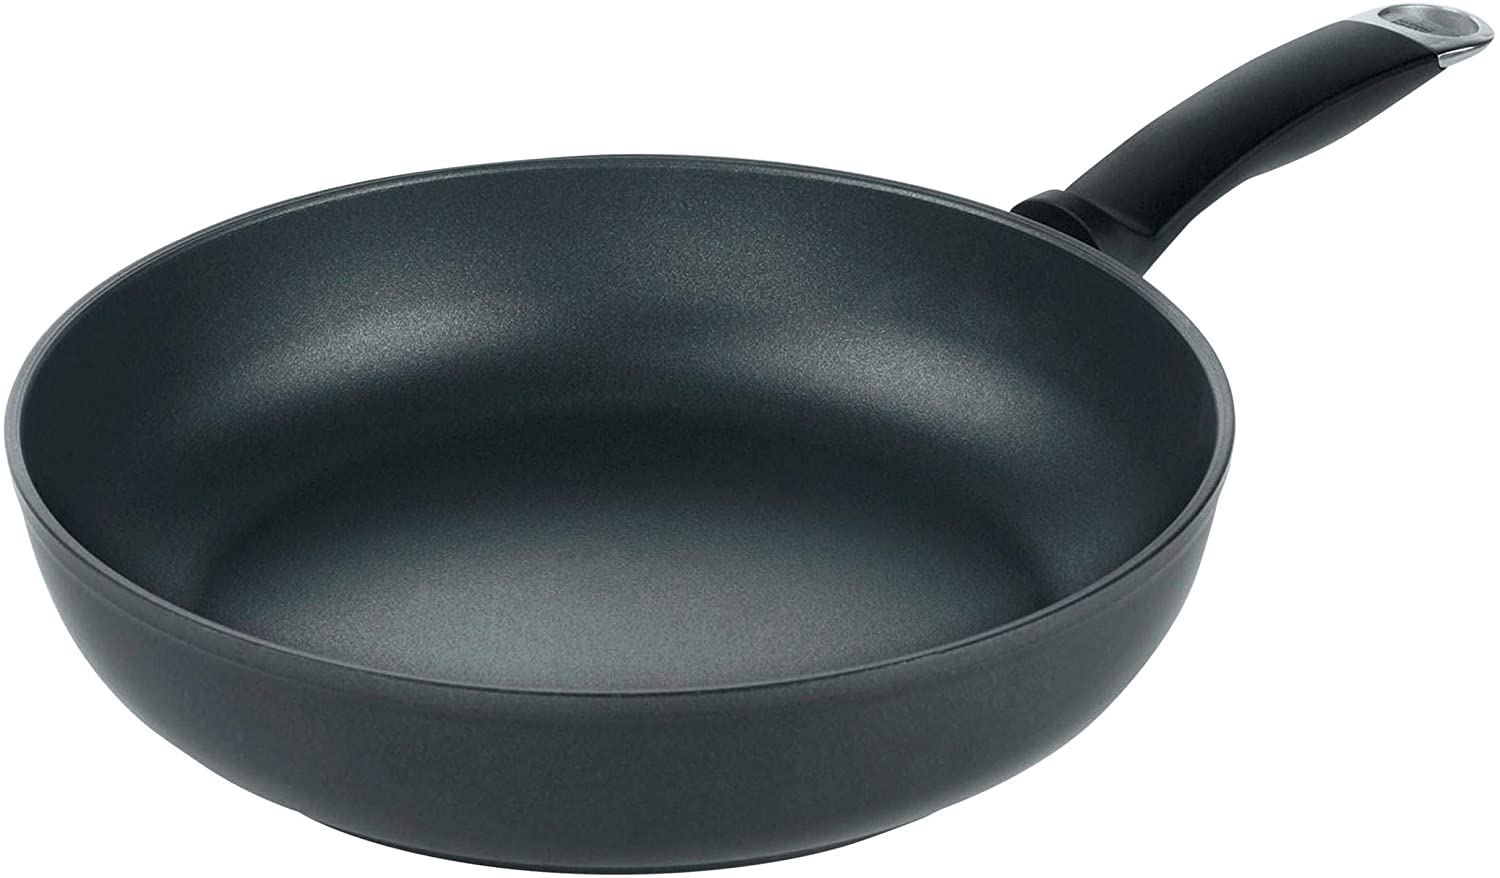 Kuhn Rikon Gourmet Inducción Frying Pan Suitable for Induction Cookers